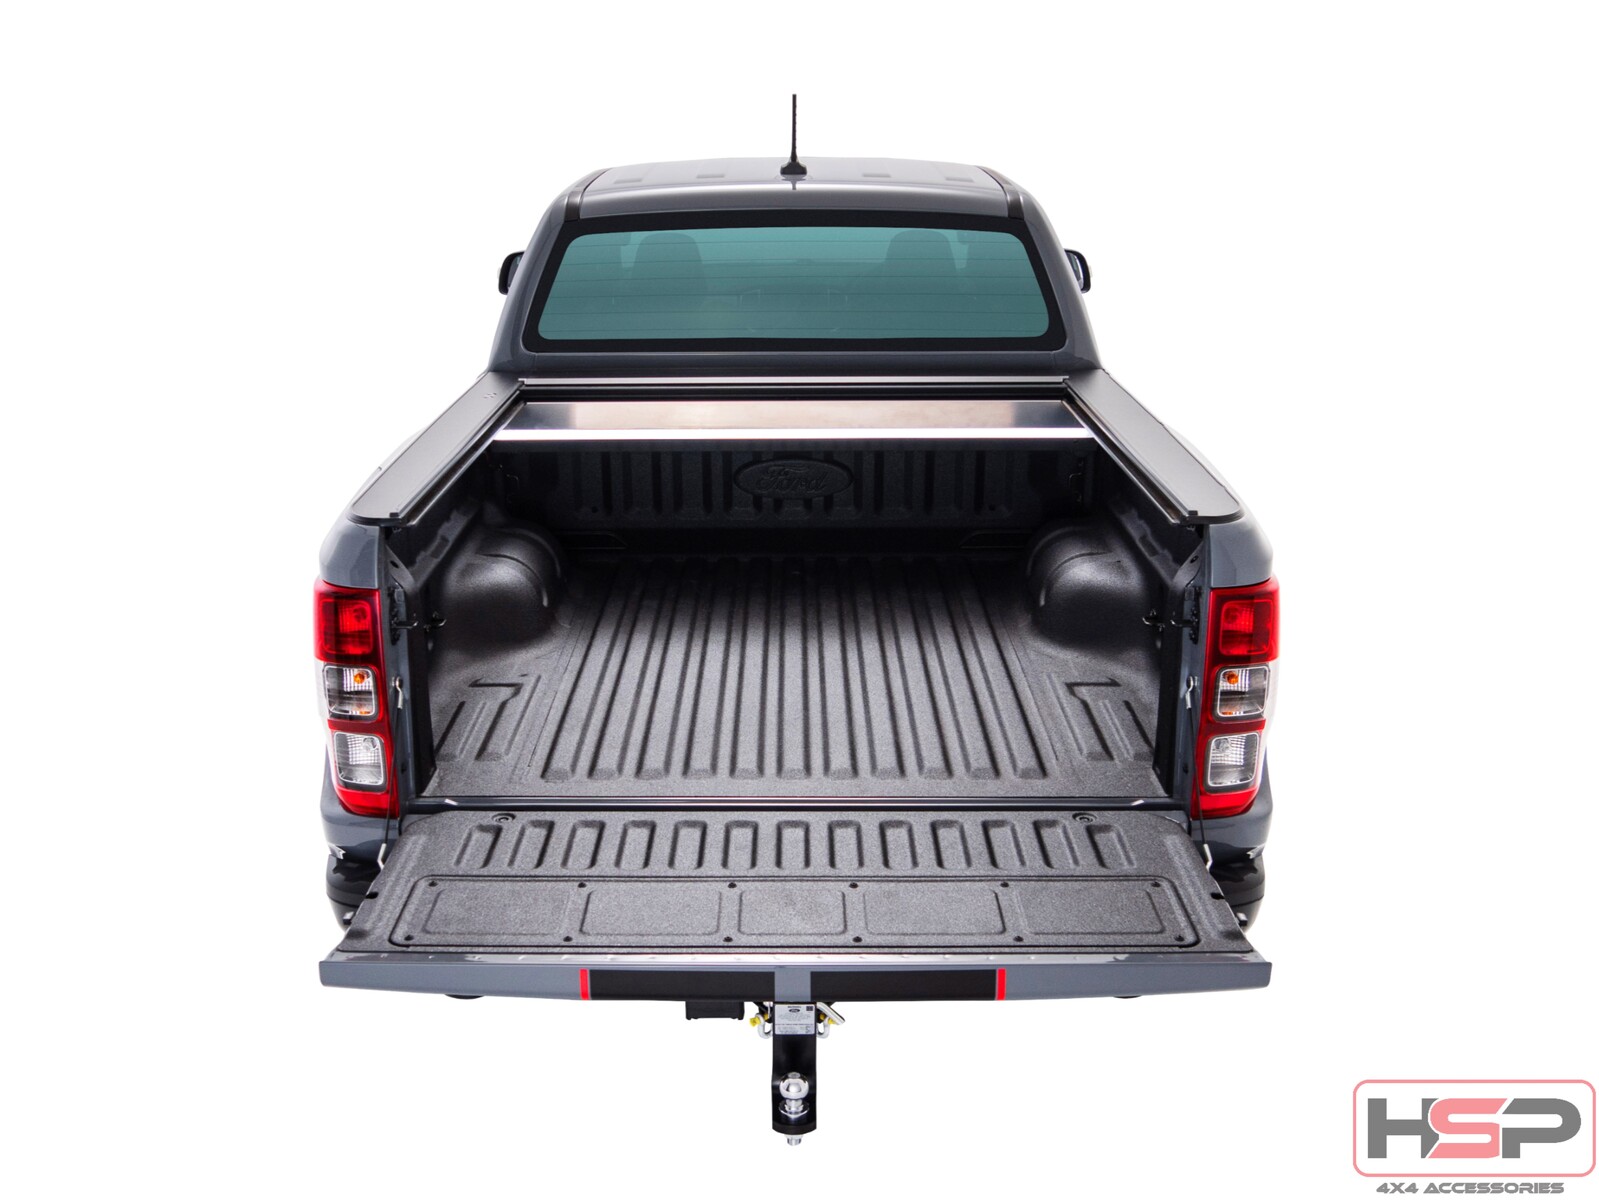 HSP Roll R Cover Series 3 To Suit Ford Ranger PX & Raptor (Dual Cab)